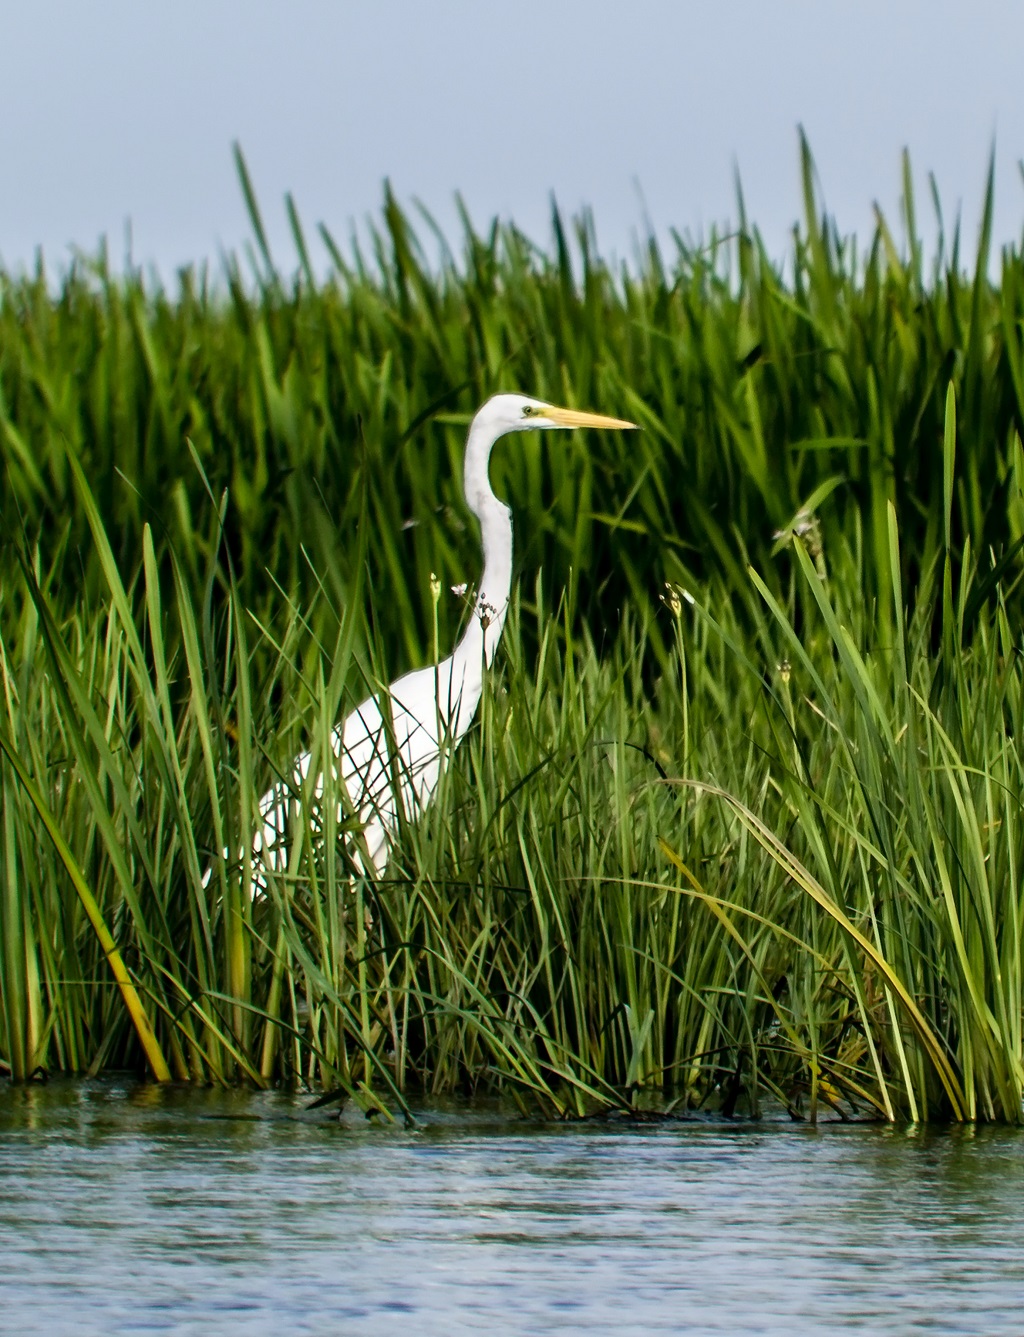 Great Egret standing on grass near body of water